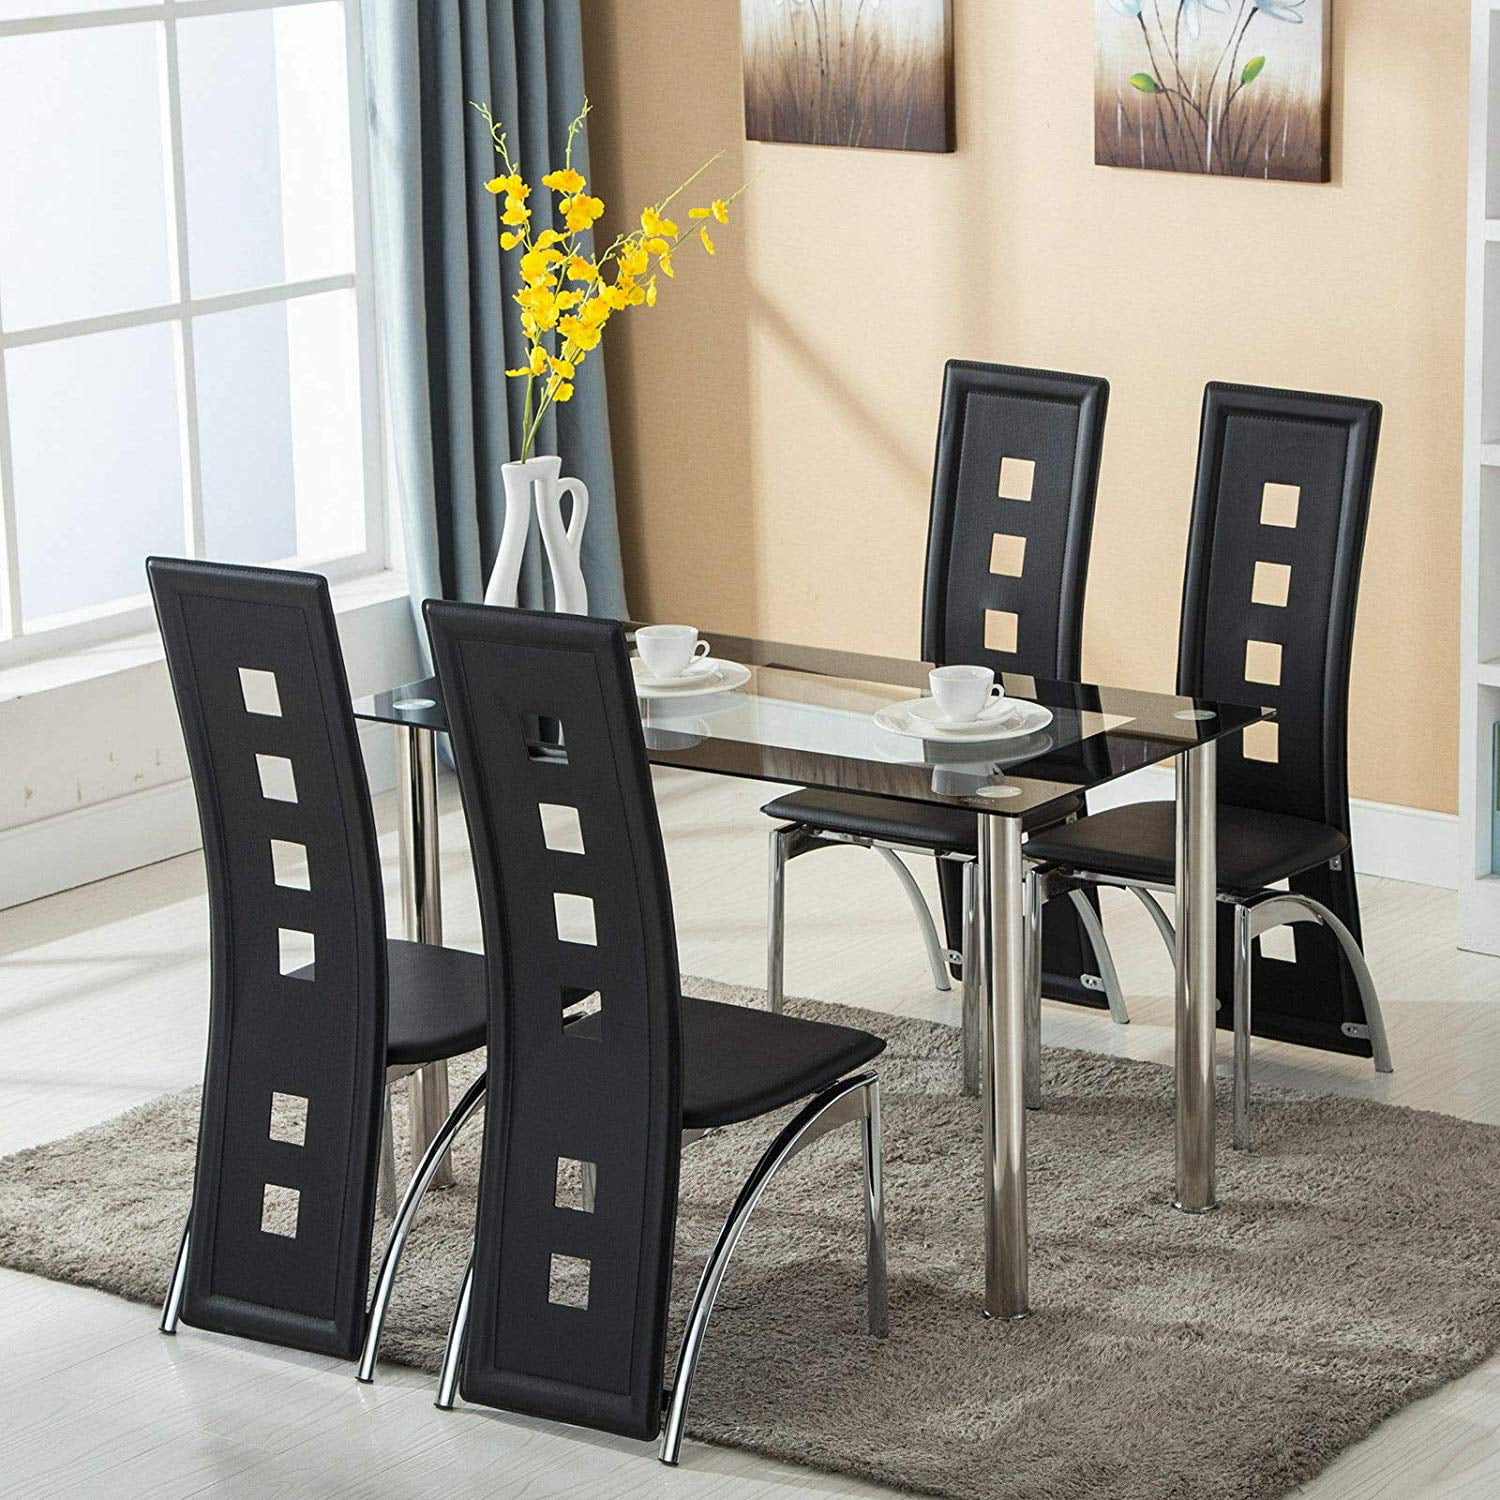 Modern 5 Piece Dining Table Set Tempered Glass Transparent Dining Table With 4pcs Chairs Room Kitchen Breakfast Furniture 110cm Unique Design Home Decor Black Walmart Com Walmart Com